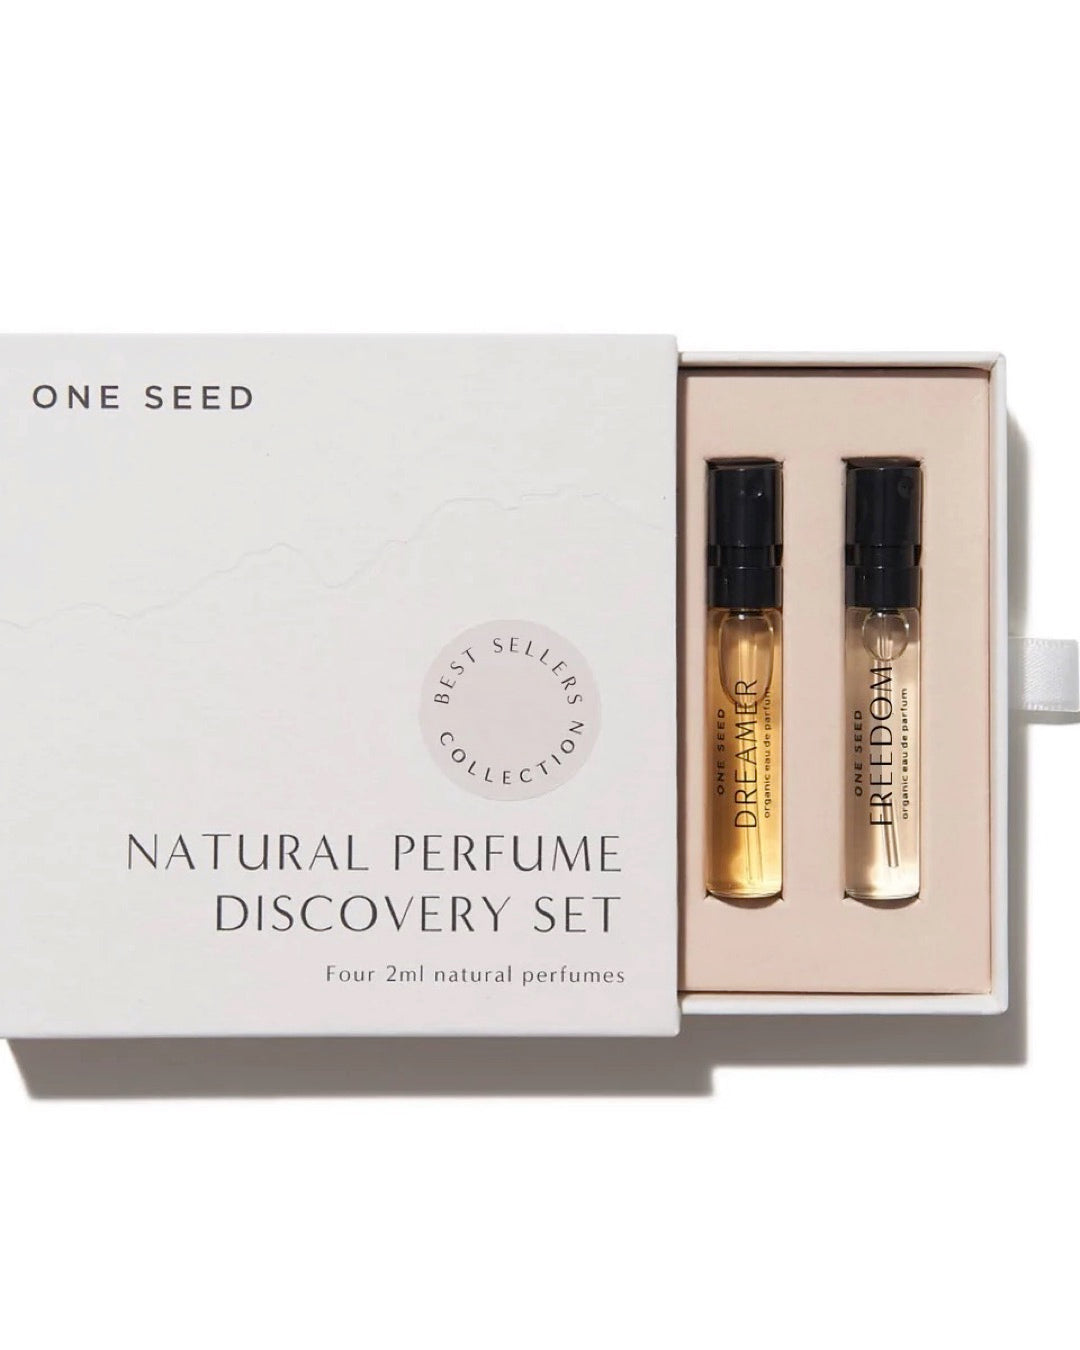 Organic Perfume Discovery Set - Best Sellers 4-piece Perfume by One Seed - Prae Store